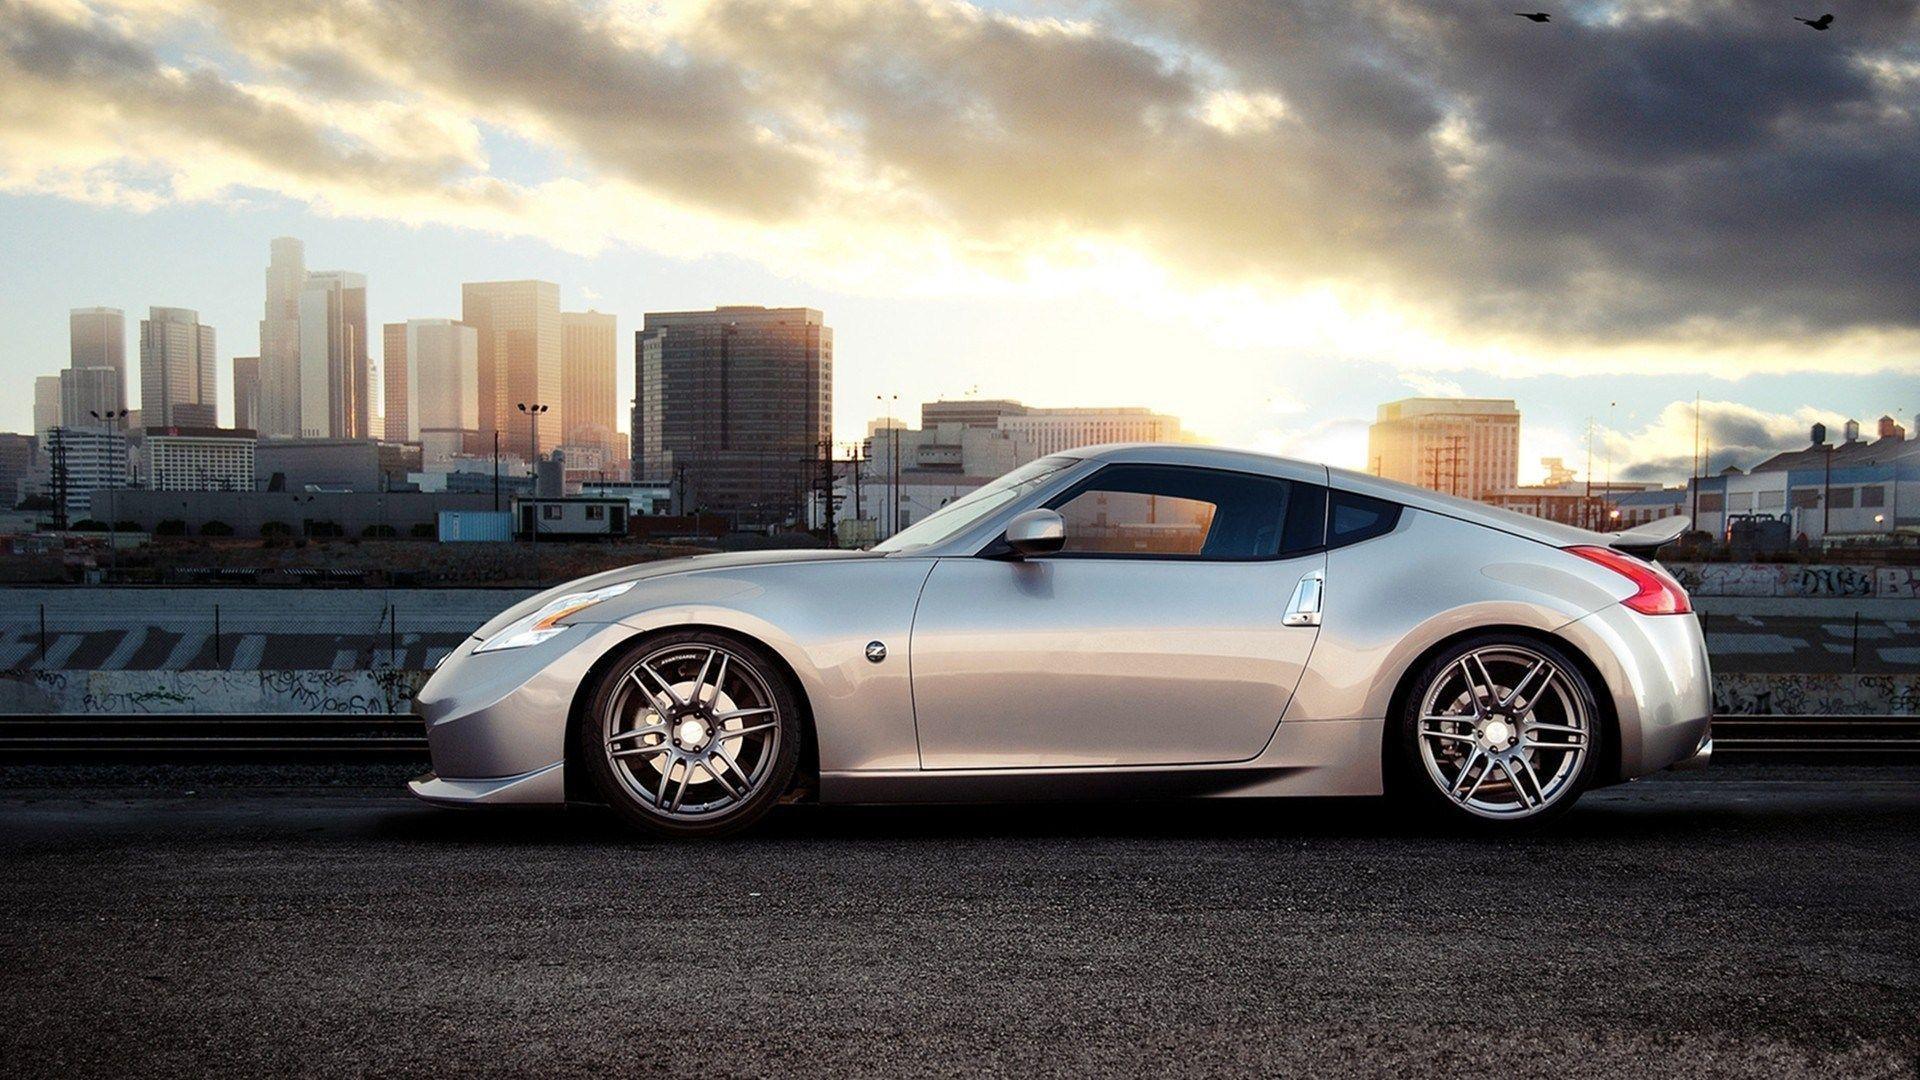 Nissan 370z Wallpapers Wallpaper Cave Images, Photos, Reviews